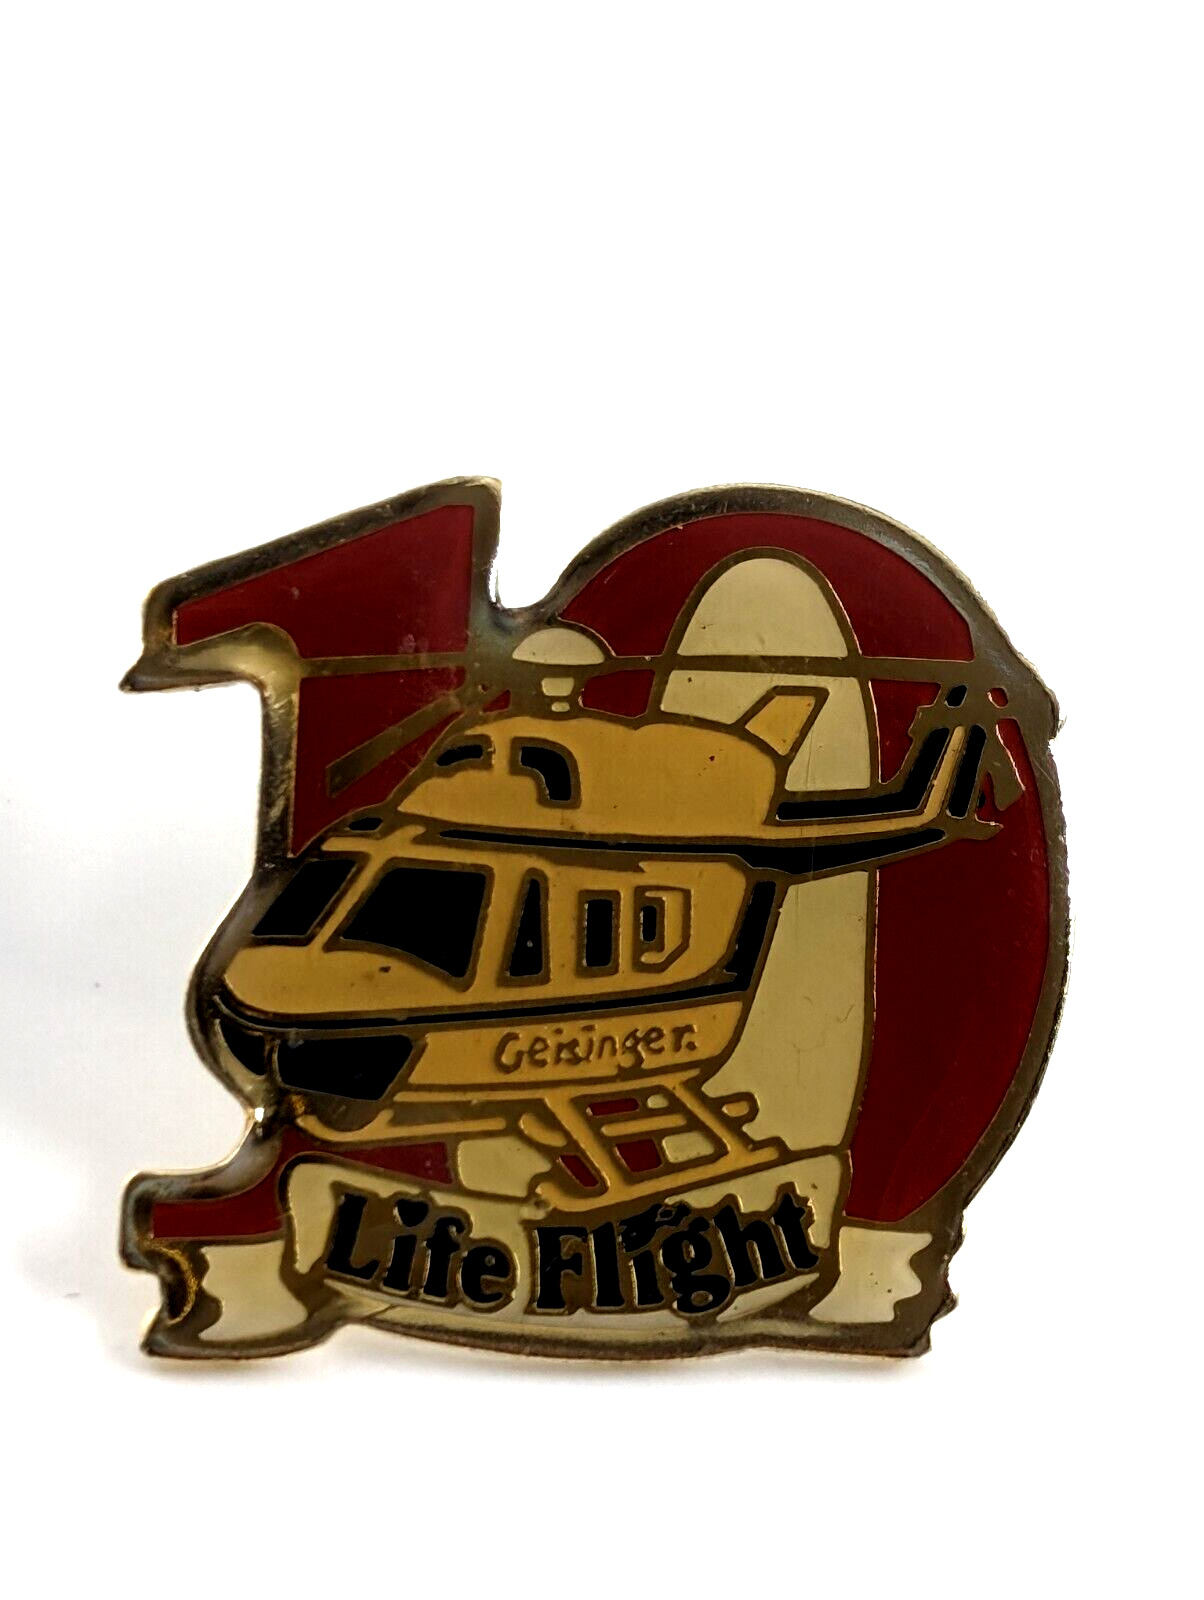 Geisinger Life Flight Helicopters Number 10 Pin Air Ambulance Medical Transport